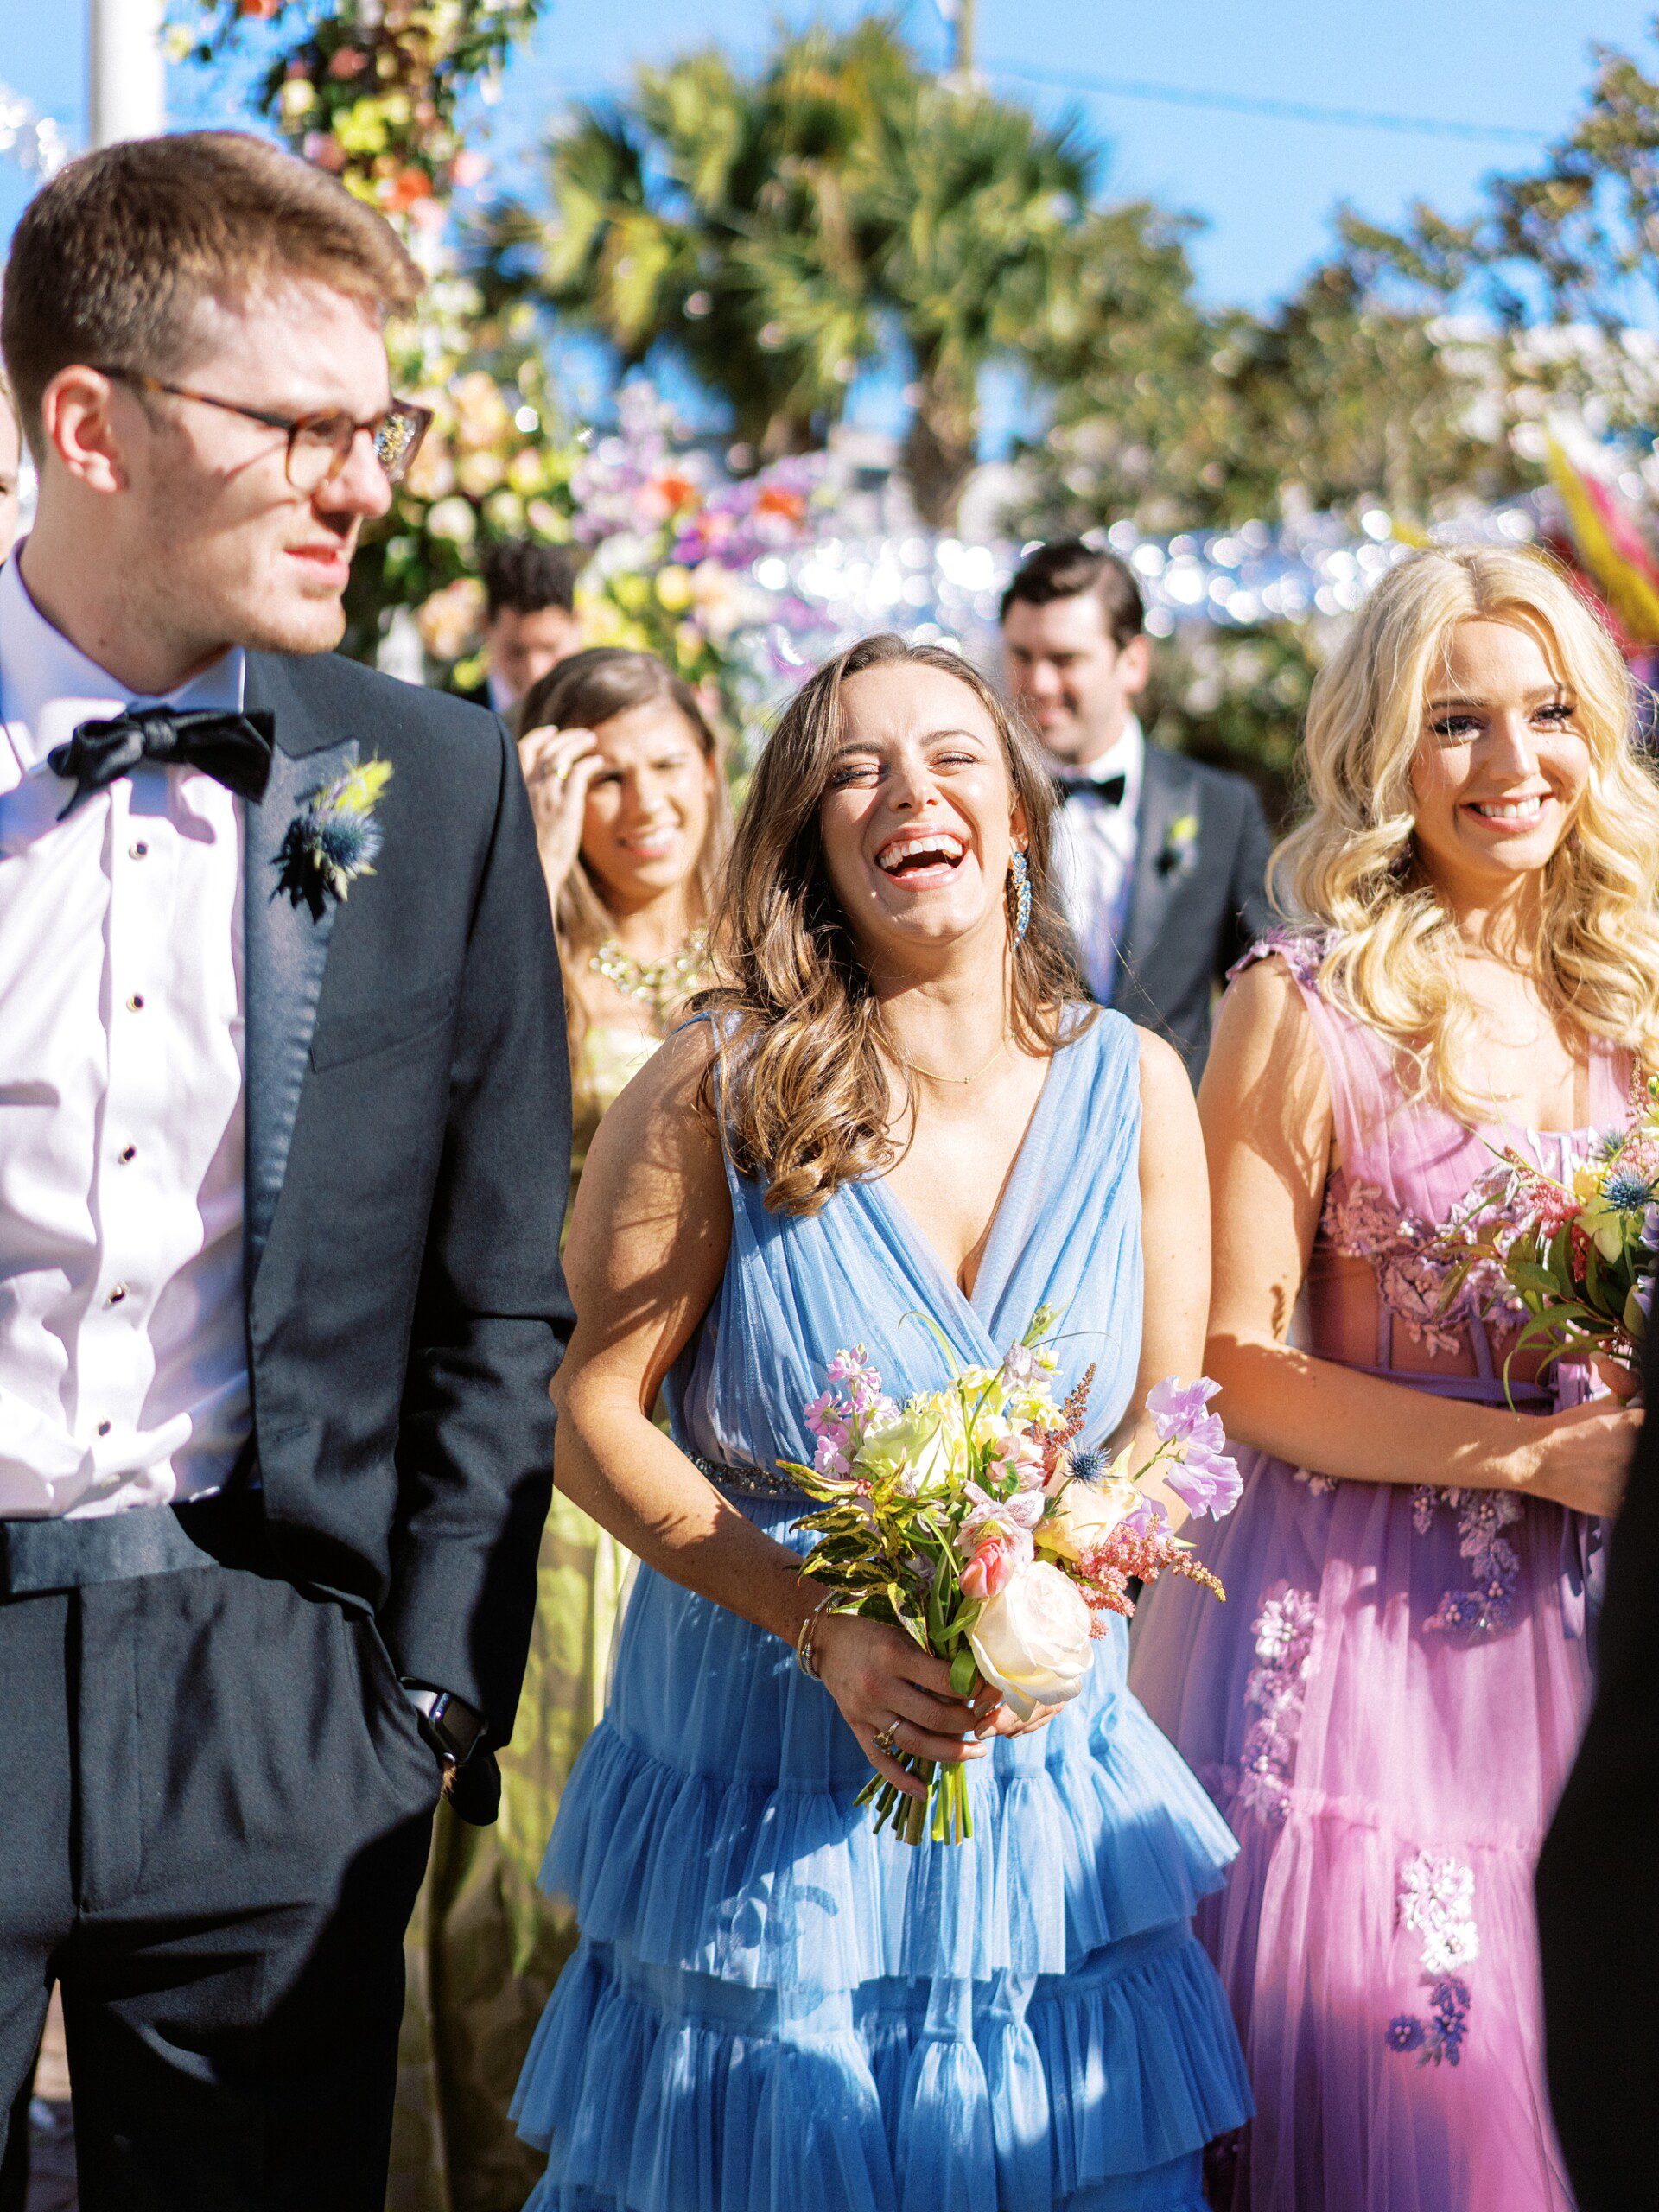 Candid image of a very fashionable bridesmaid laughing with a groomsman at a Charleston wedding